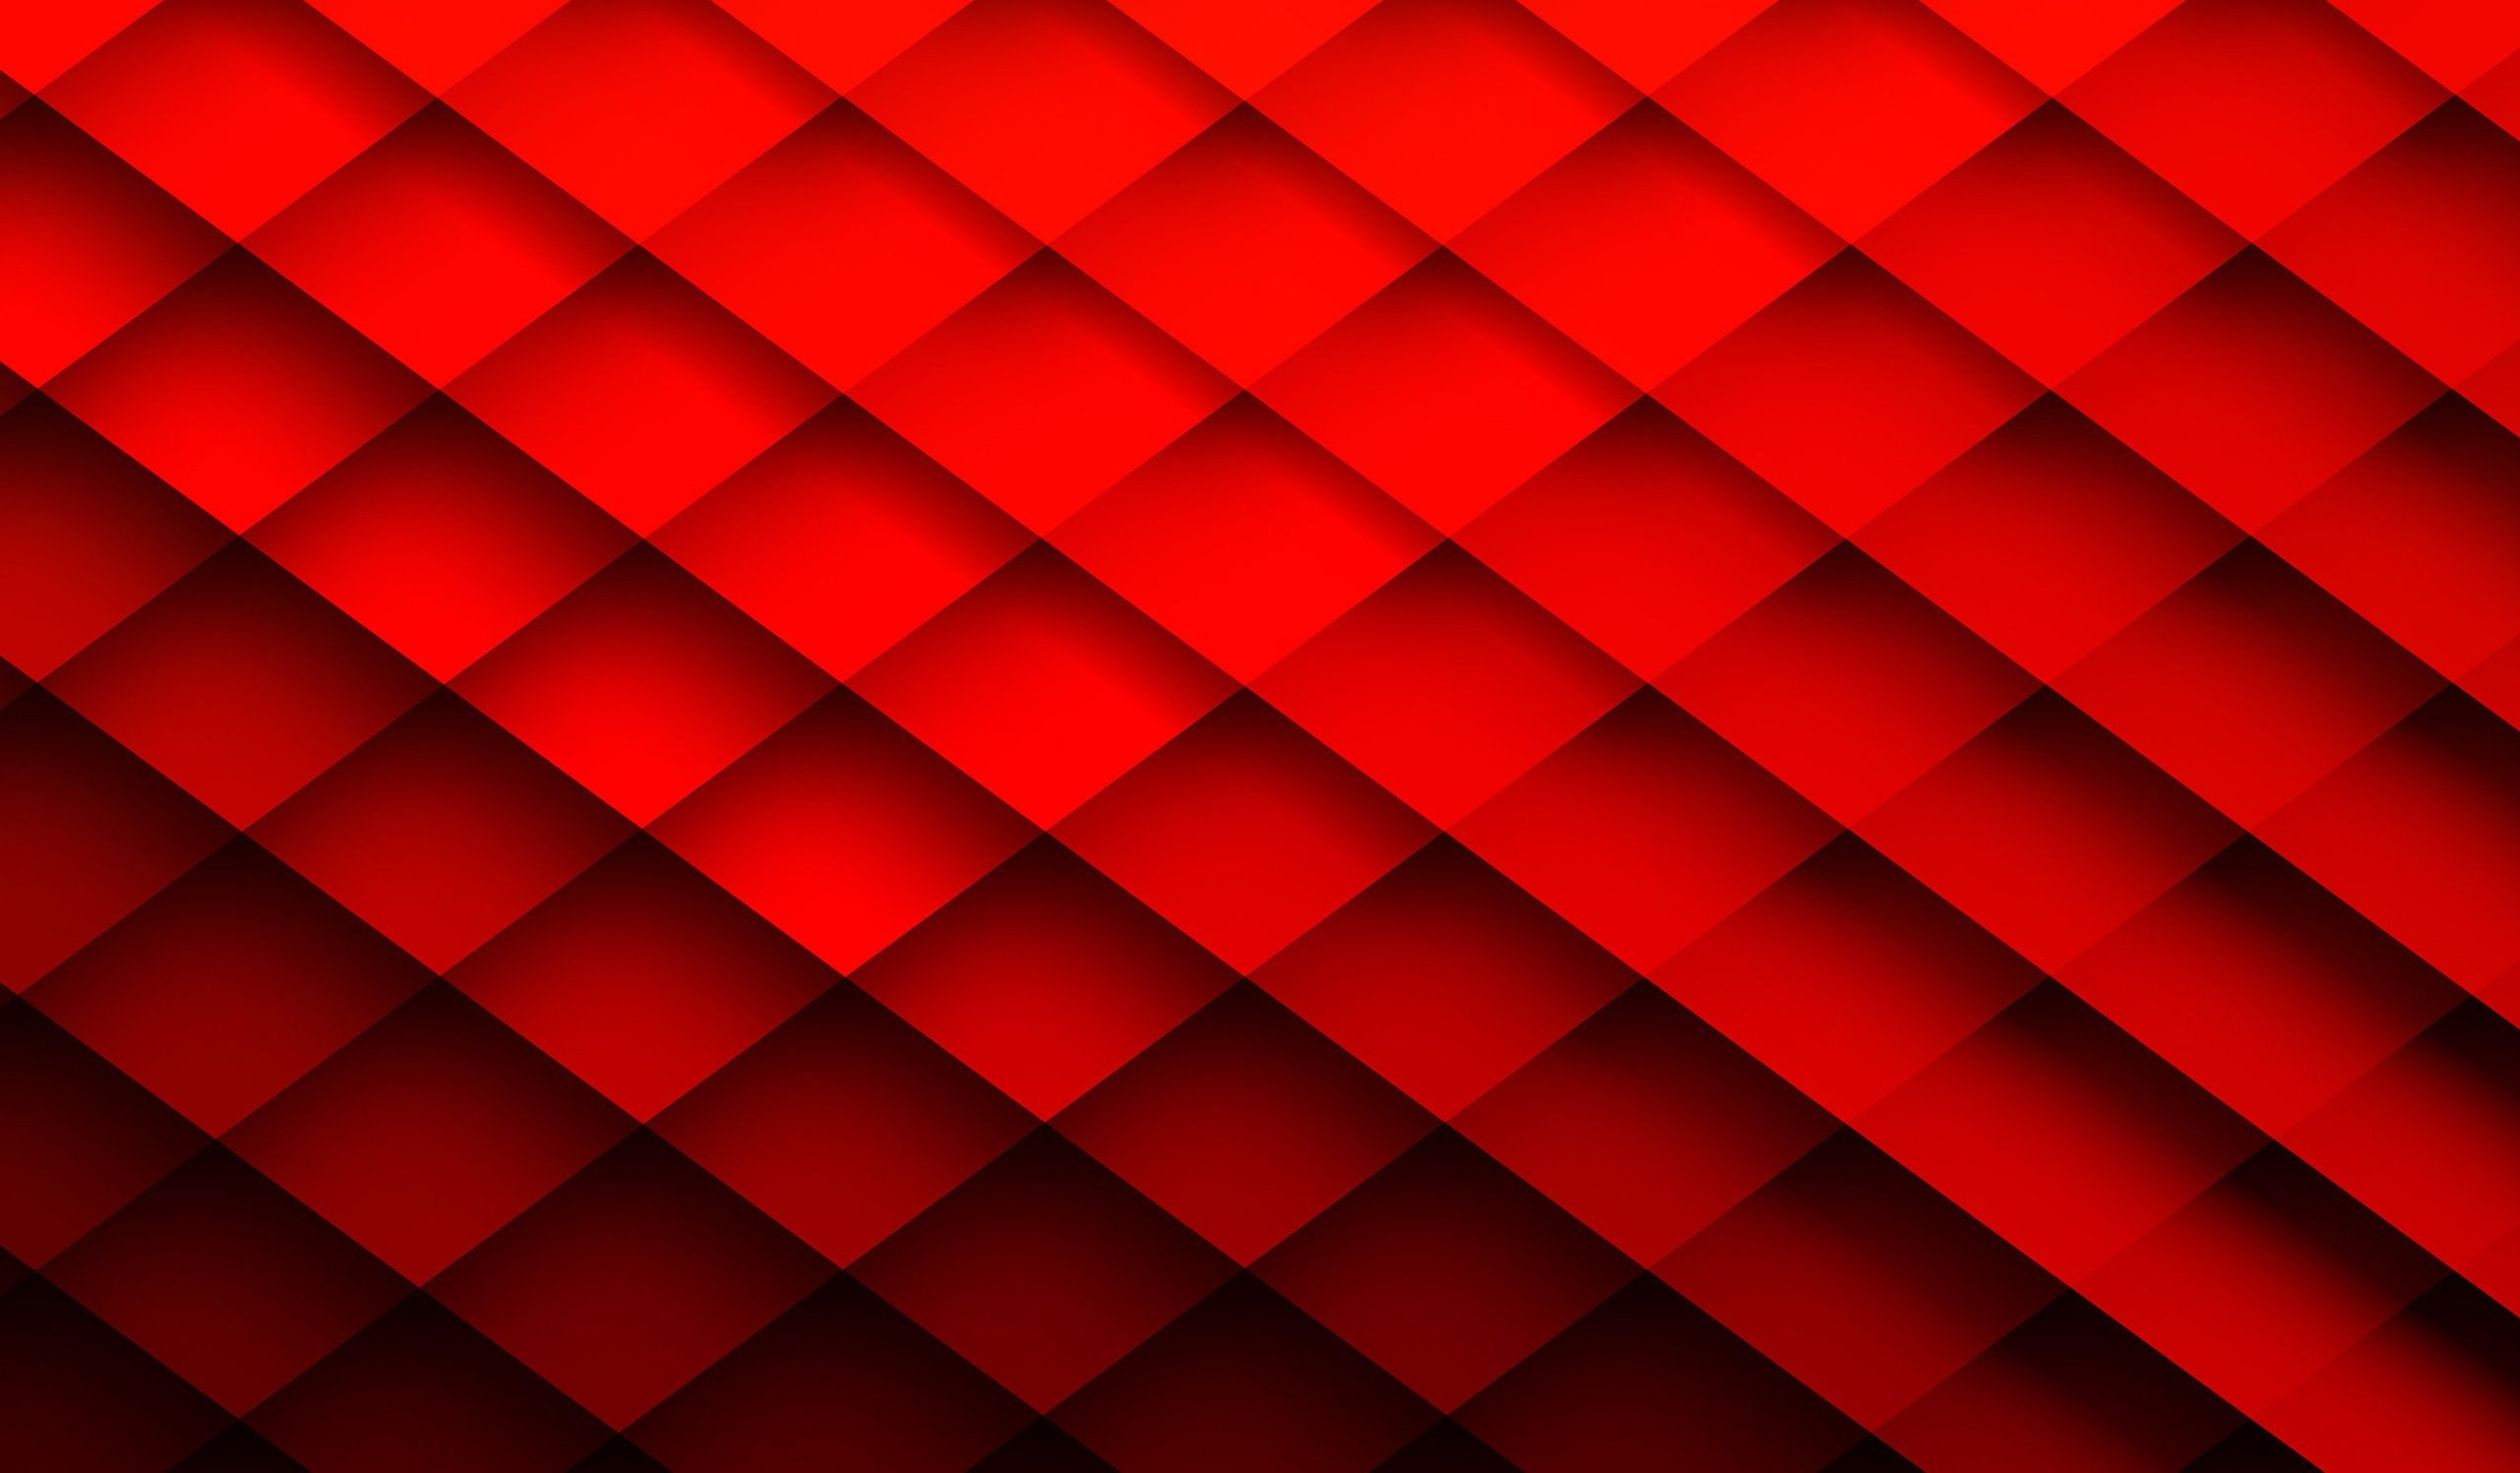 Red Wallpaper Hd For Android  2160x3840 Wallpaper  teahubio